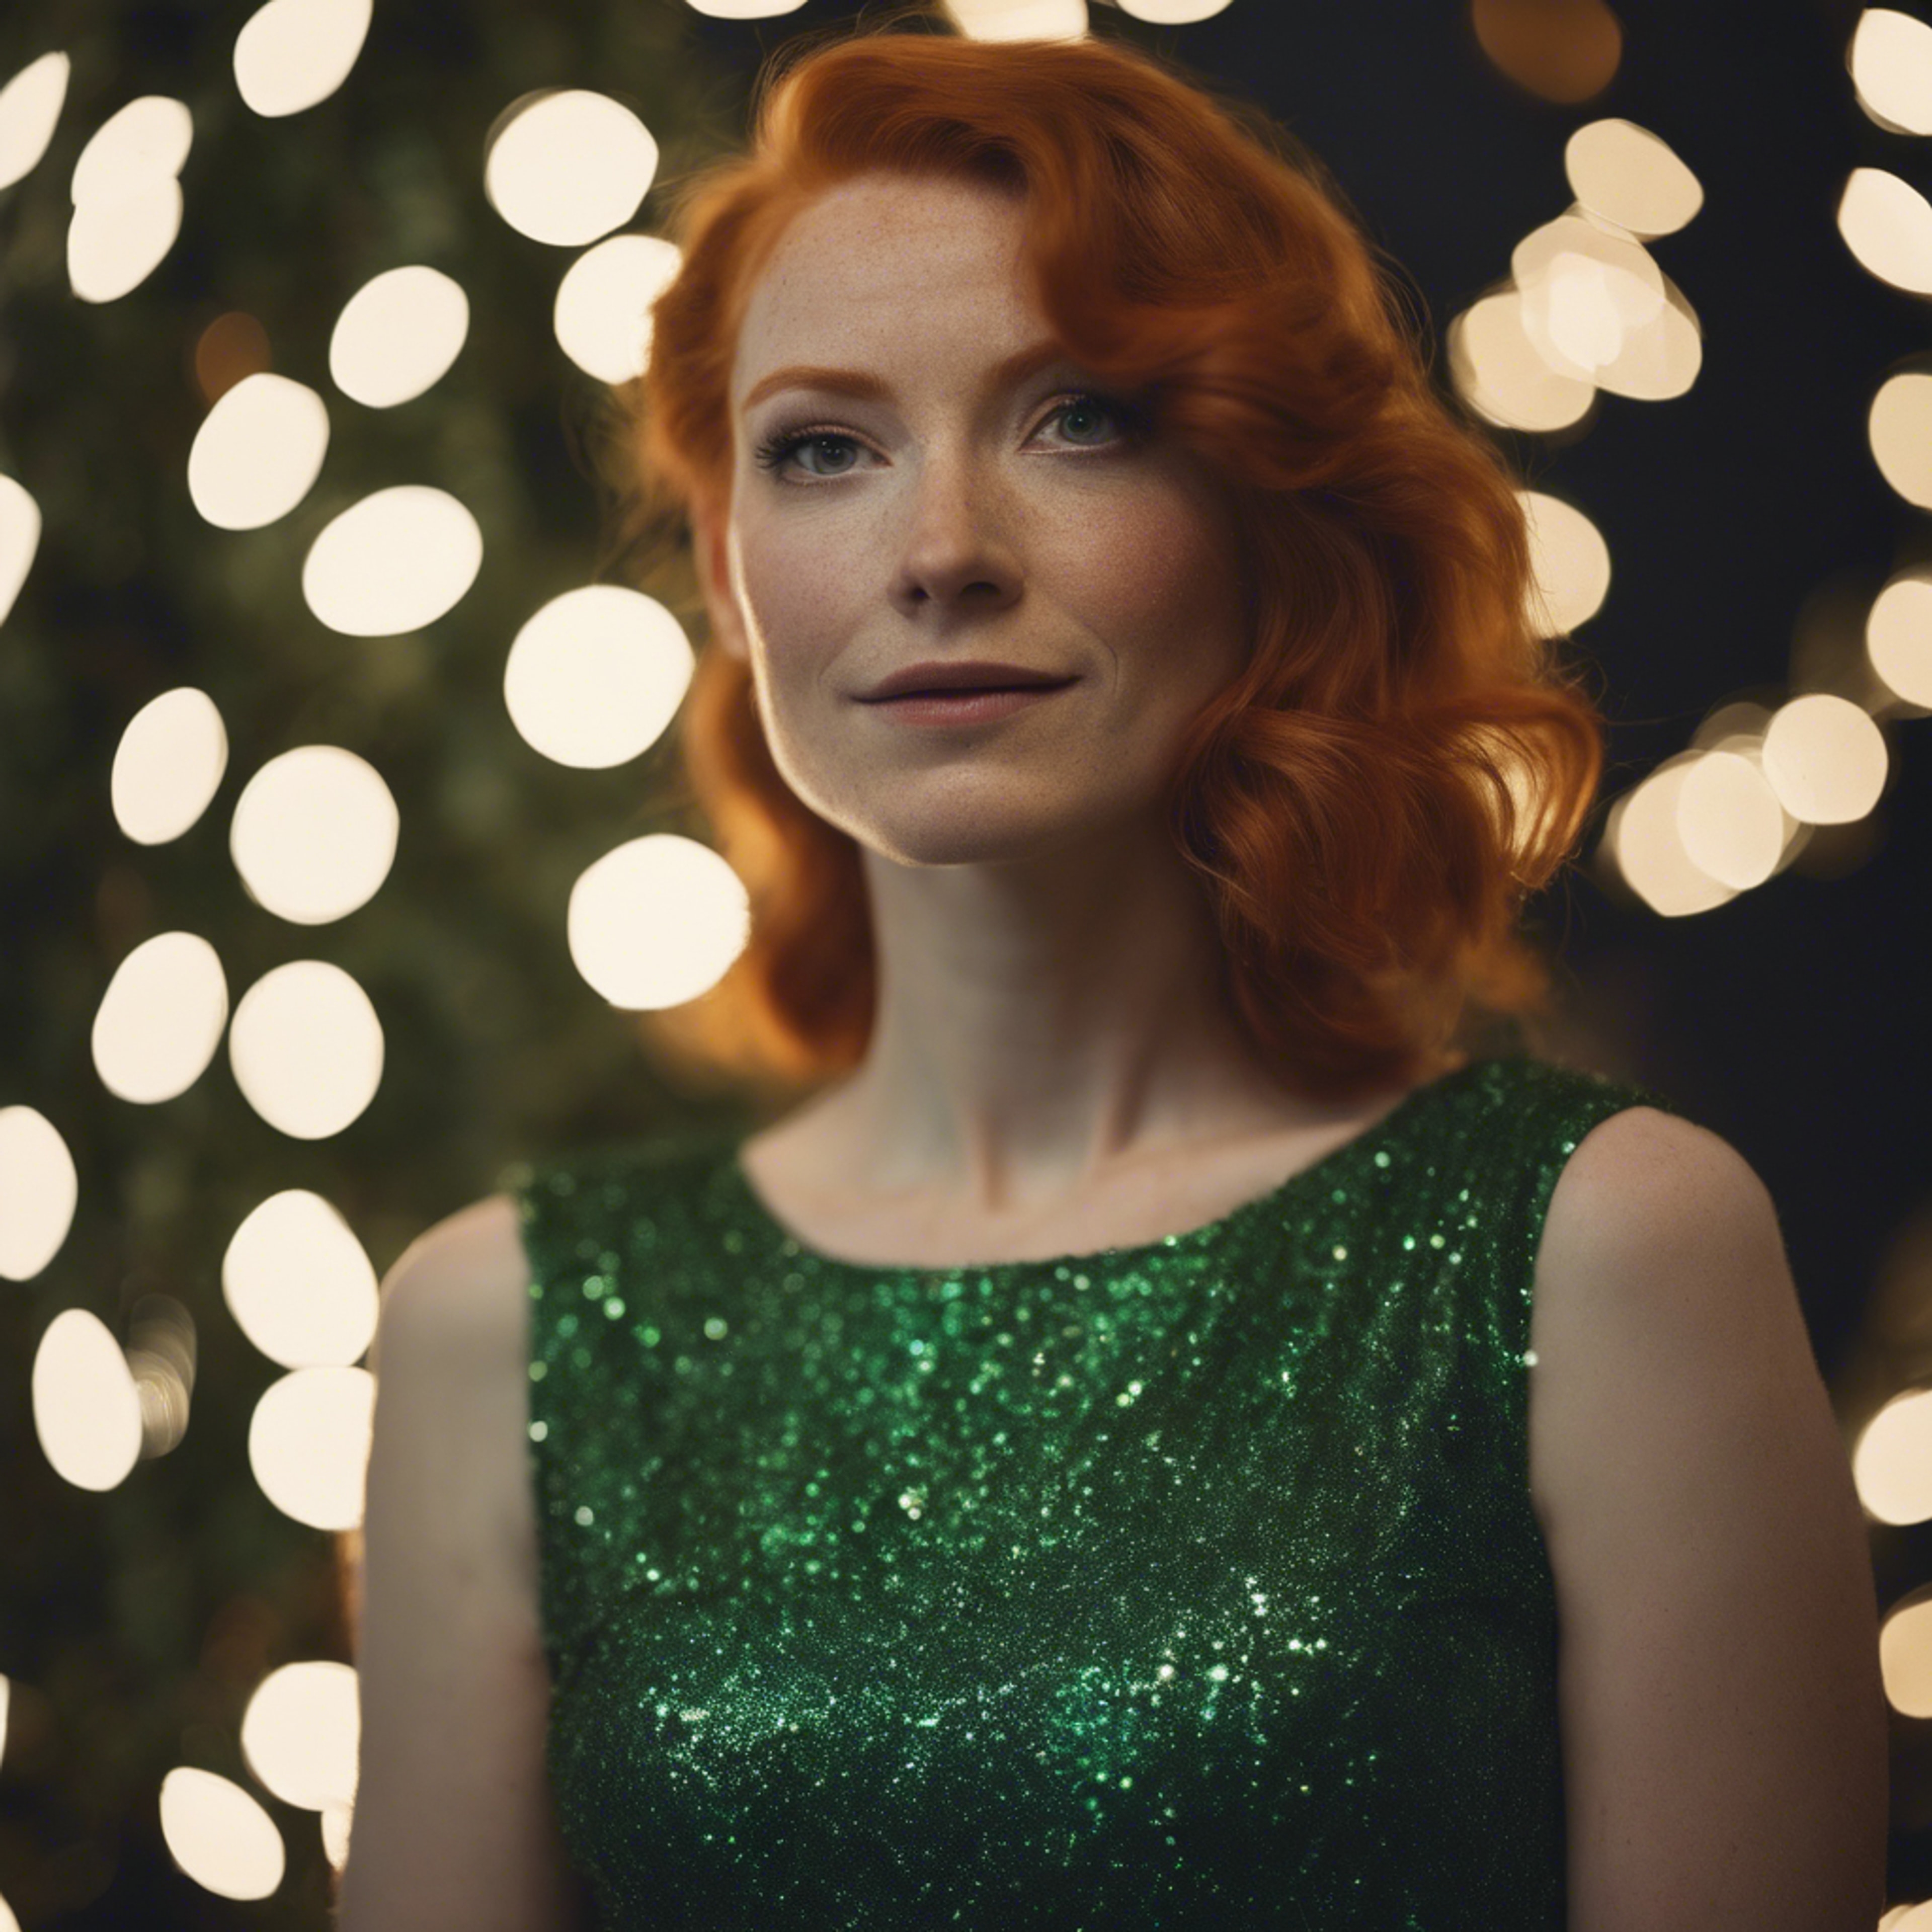 A redheaded woman wearing a sparkly green dress at a Christmas party Валлпапер[a7aea6b7222f4d2facc9]